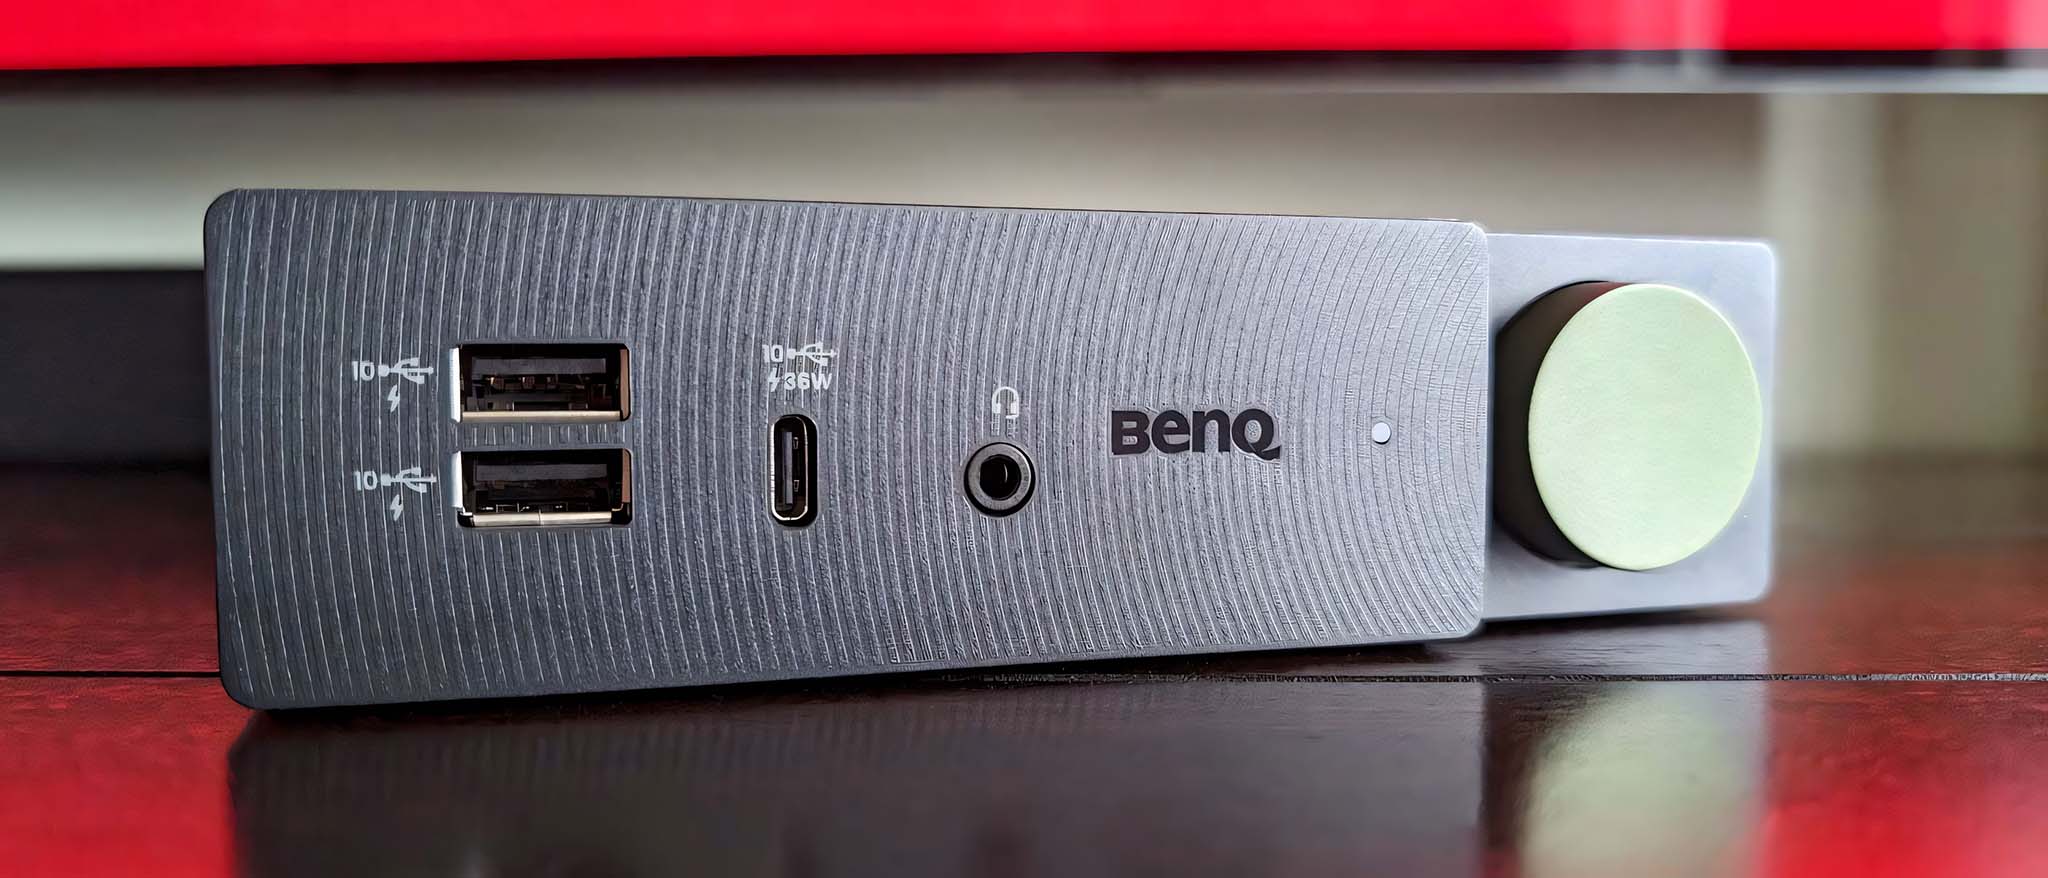 BenQ beCreatus DP1310 review: The perfect device for swapping between work  and play | Windows Central